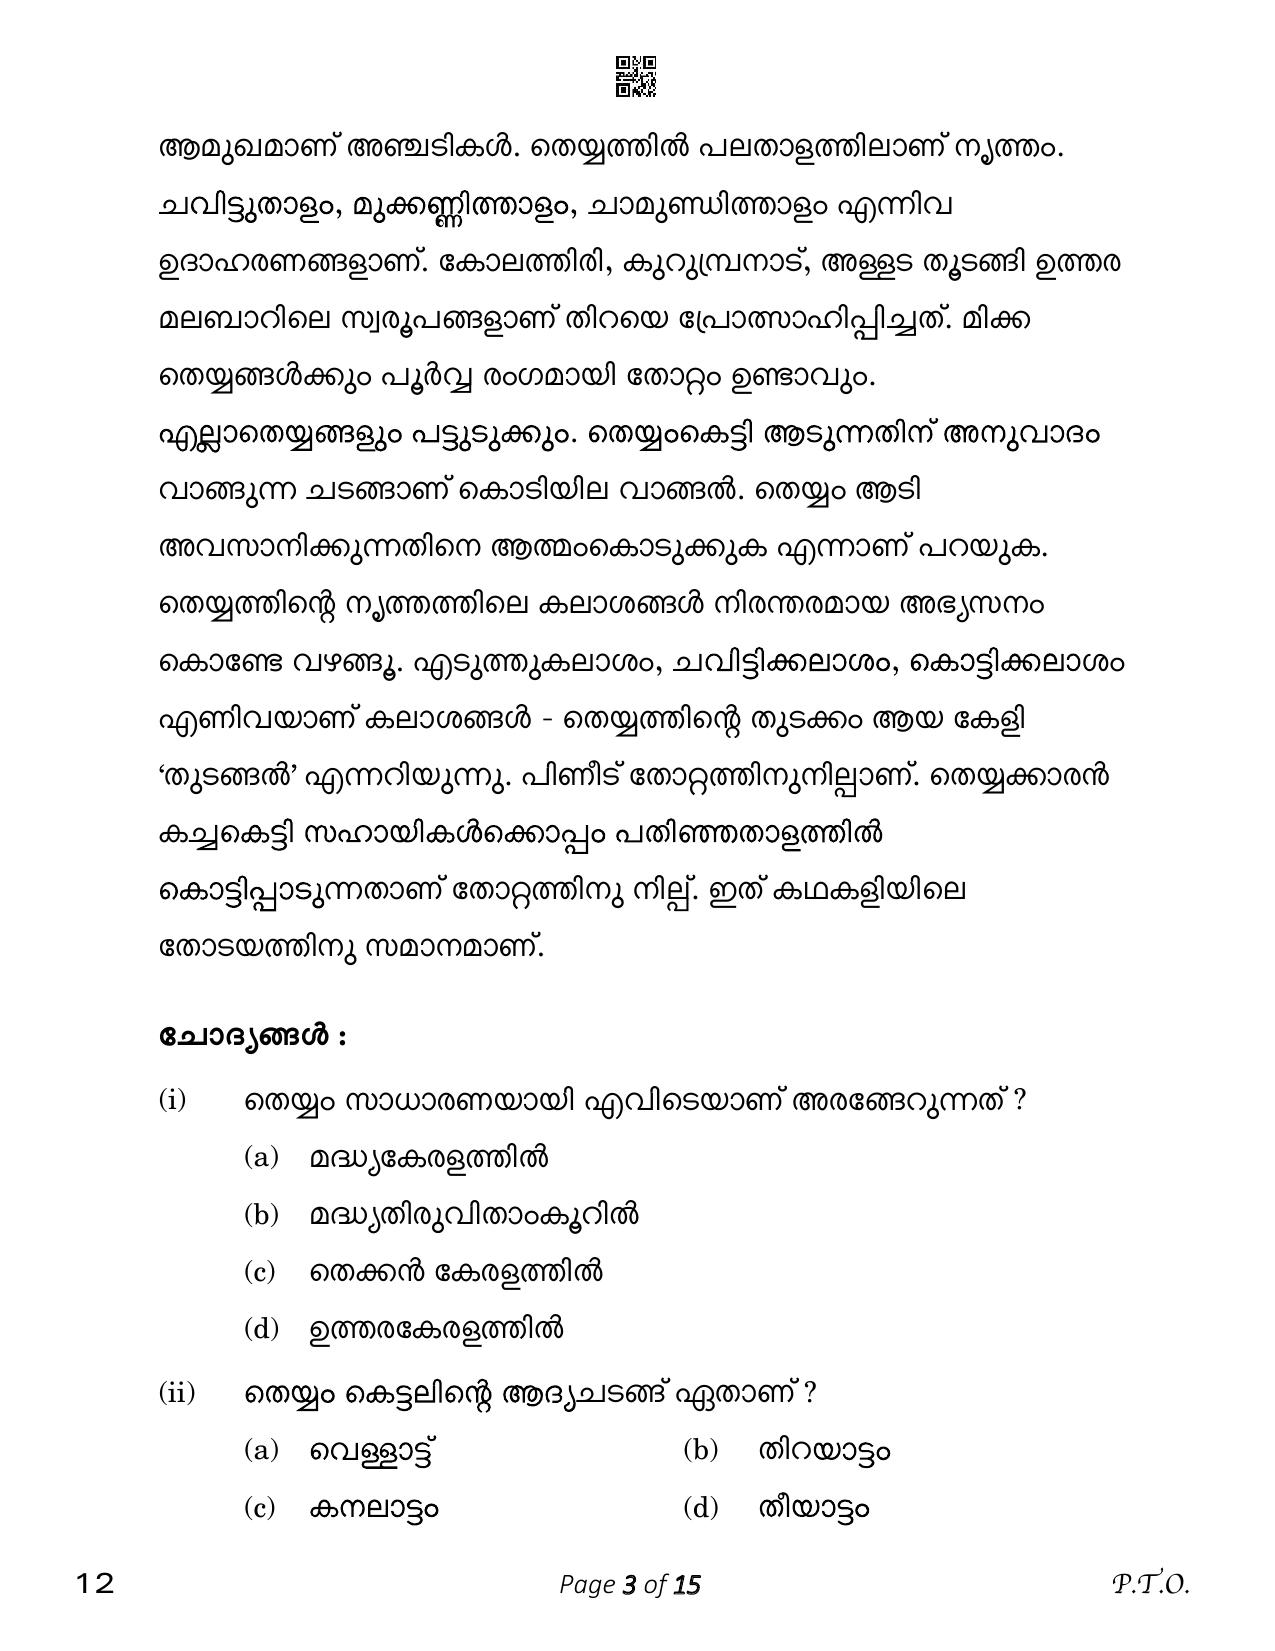 CBSE Class 12 Malayalam (Compartment) 2023 Question Paper - Page 3